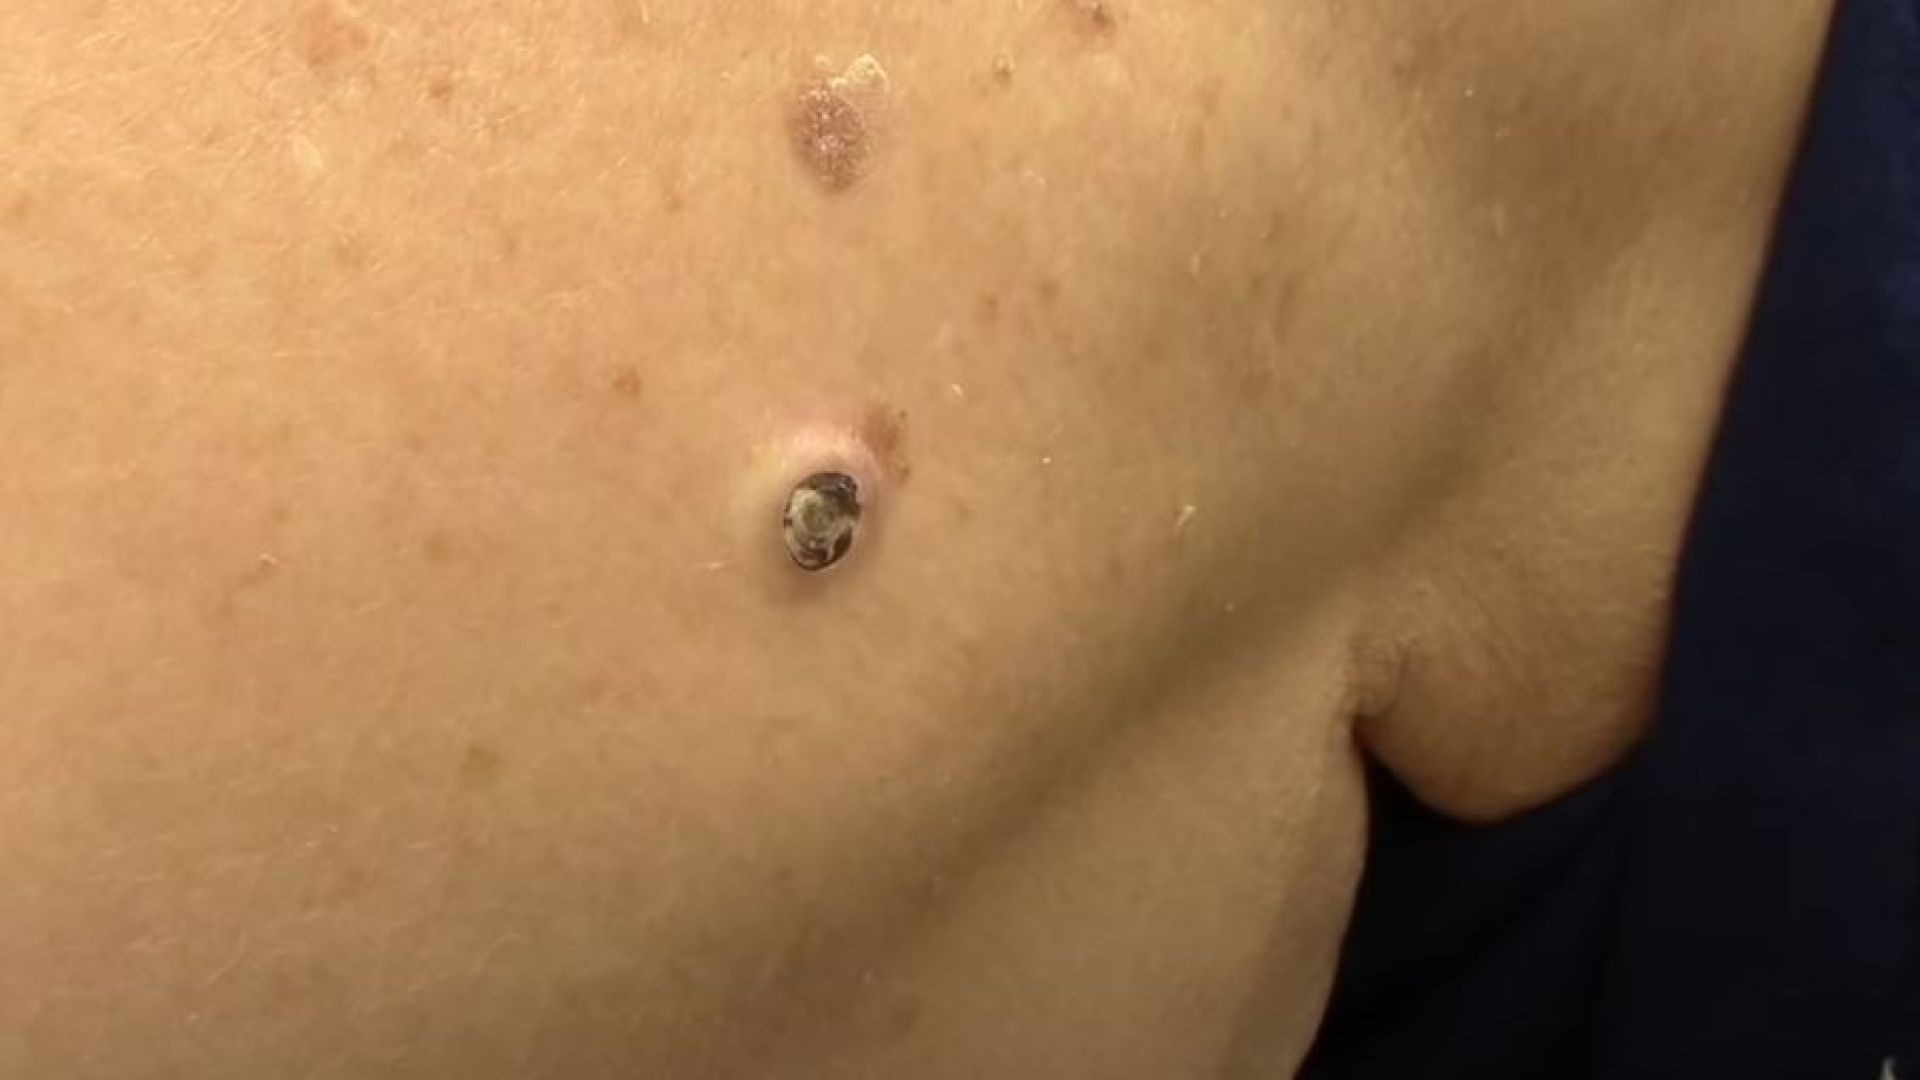 Dilated rock-hard pore of Winer removal